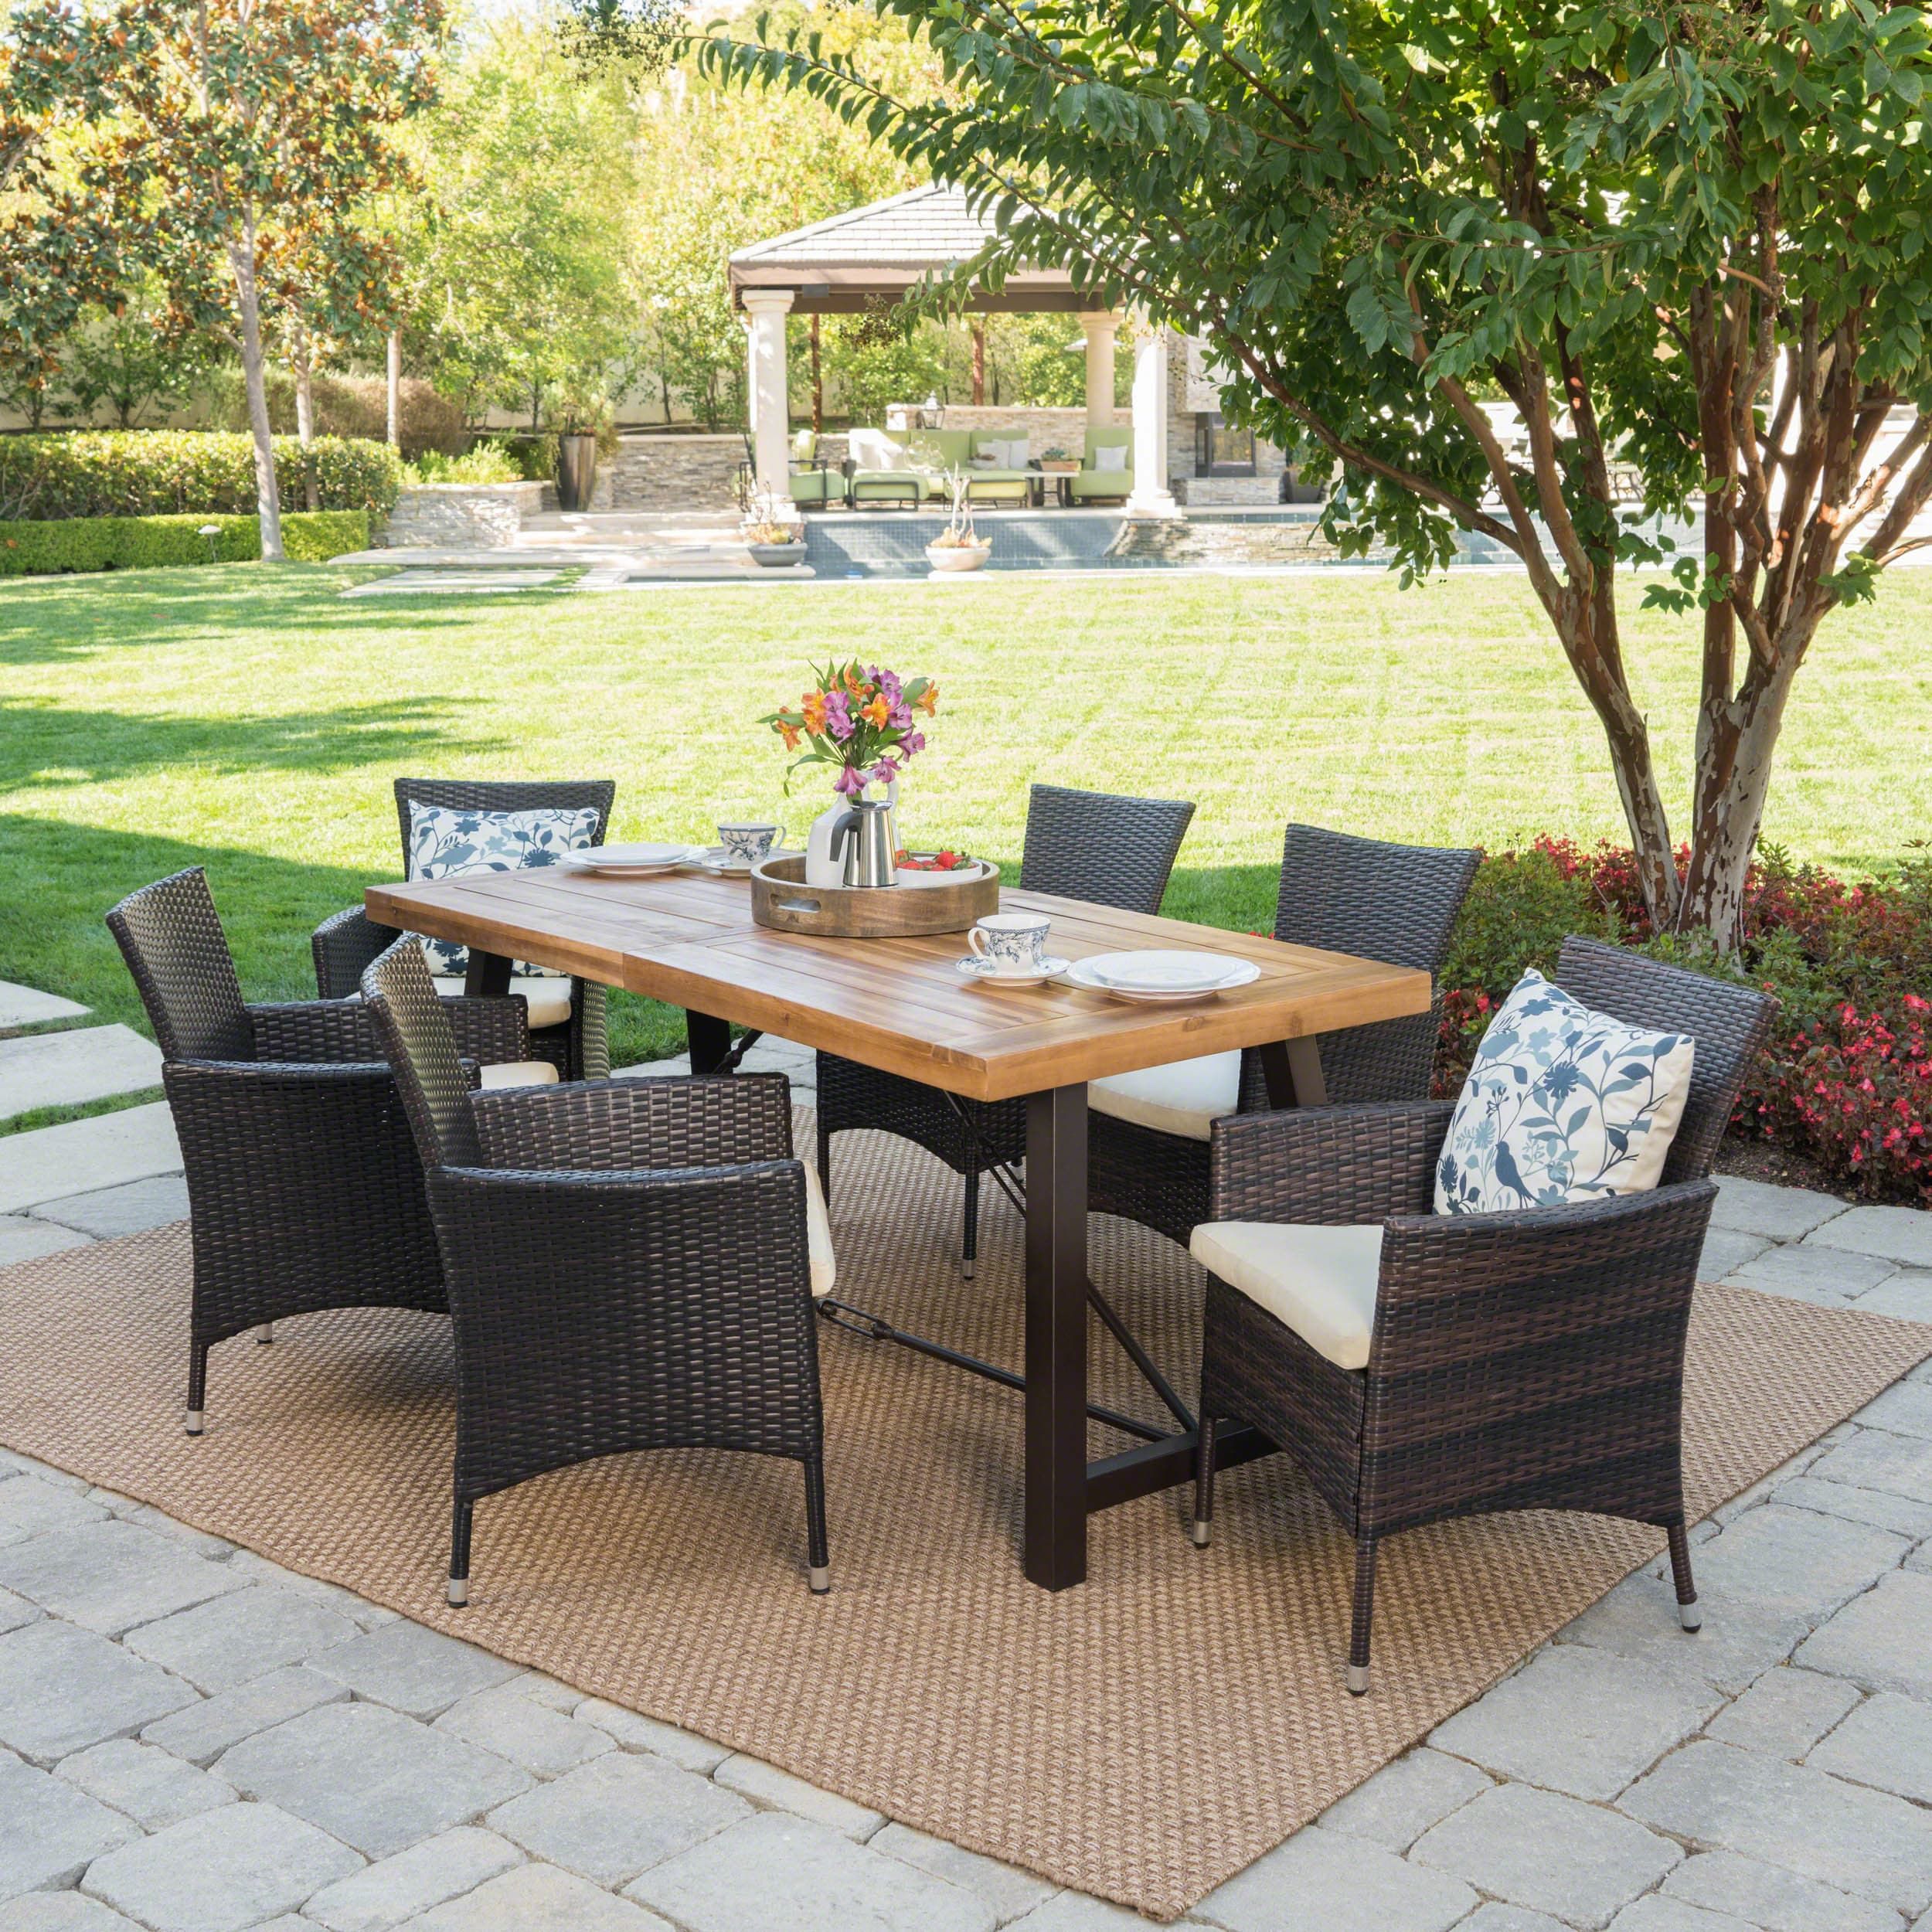 Christopher Knight Home Torrens Outdoor 7 Piece Rectangle Wicker Wood Regarding Patio Dining Sets With Cushions (View 2 of 15)